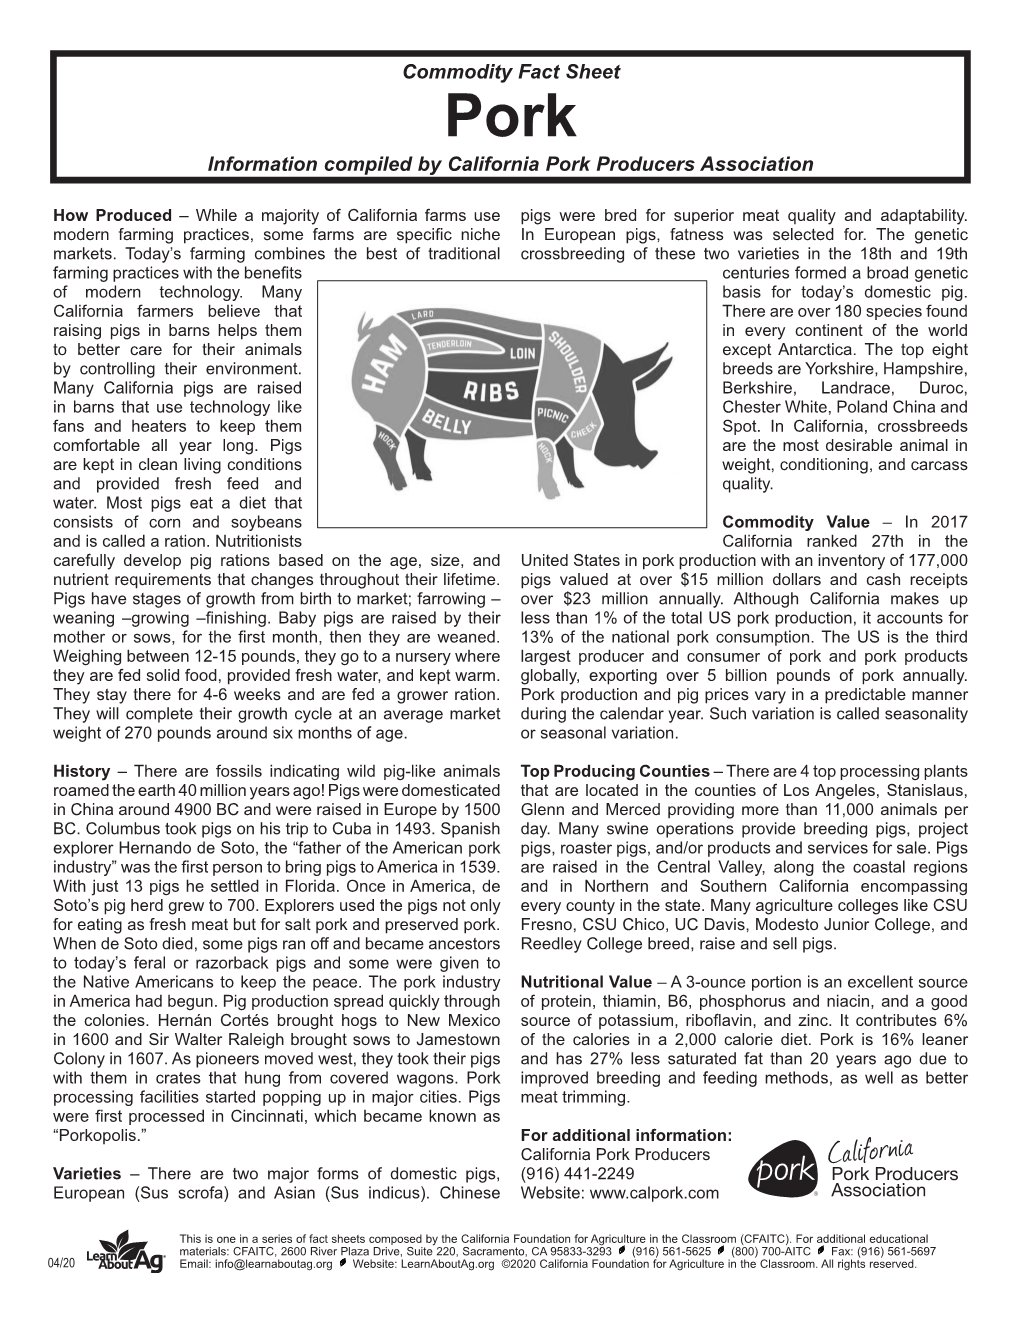 Commodity Fact Sheet Information Compiled by California Pork Producers Association